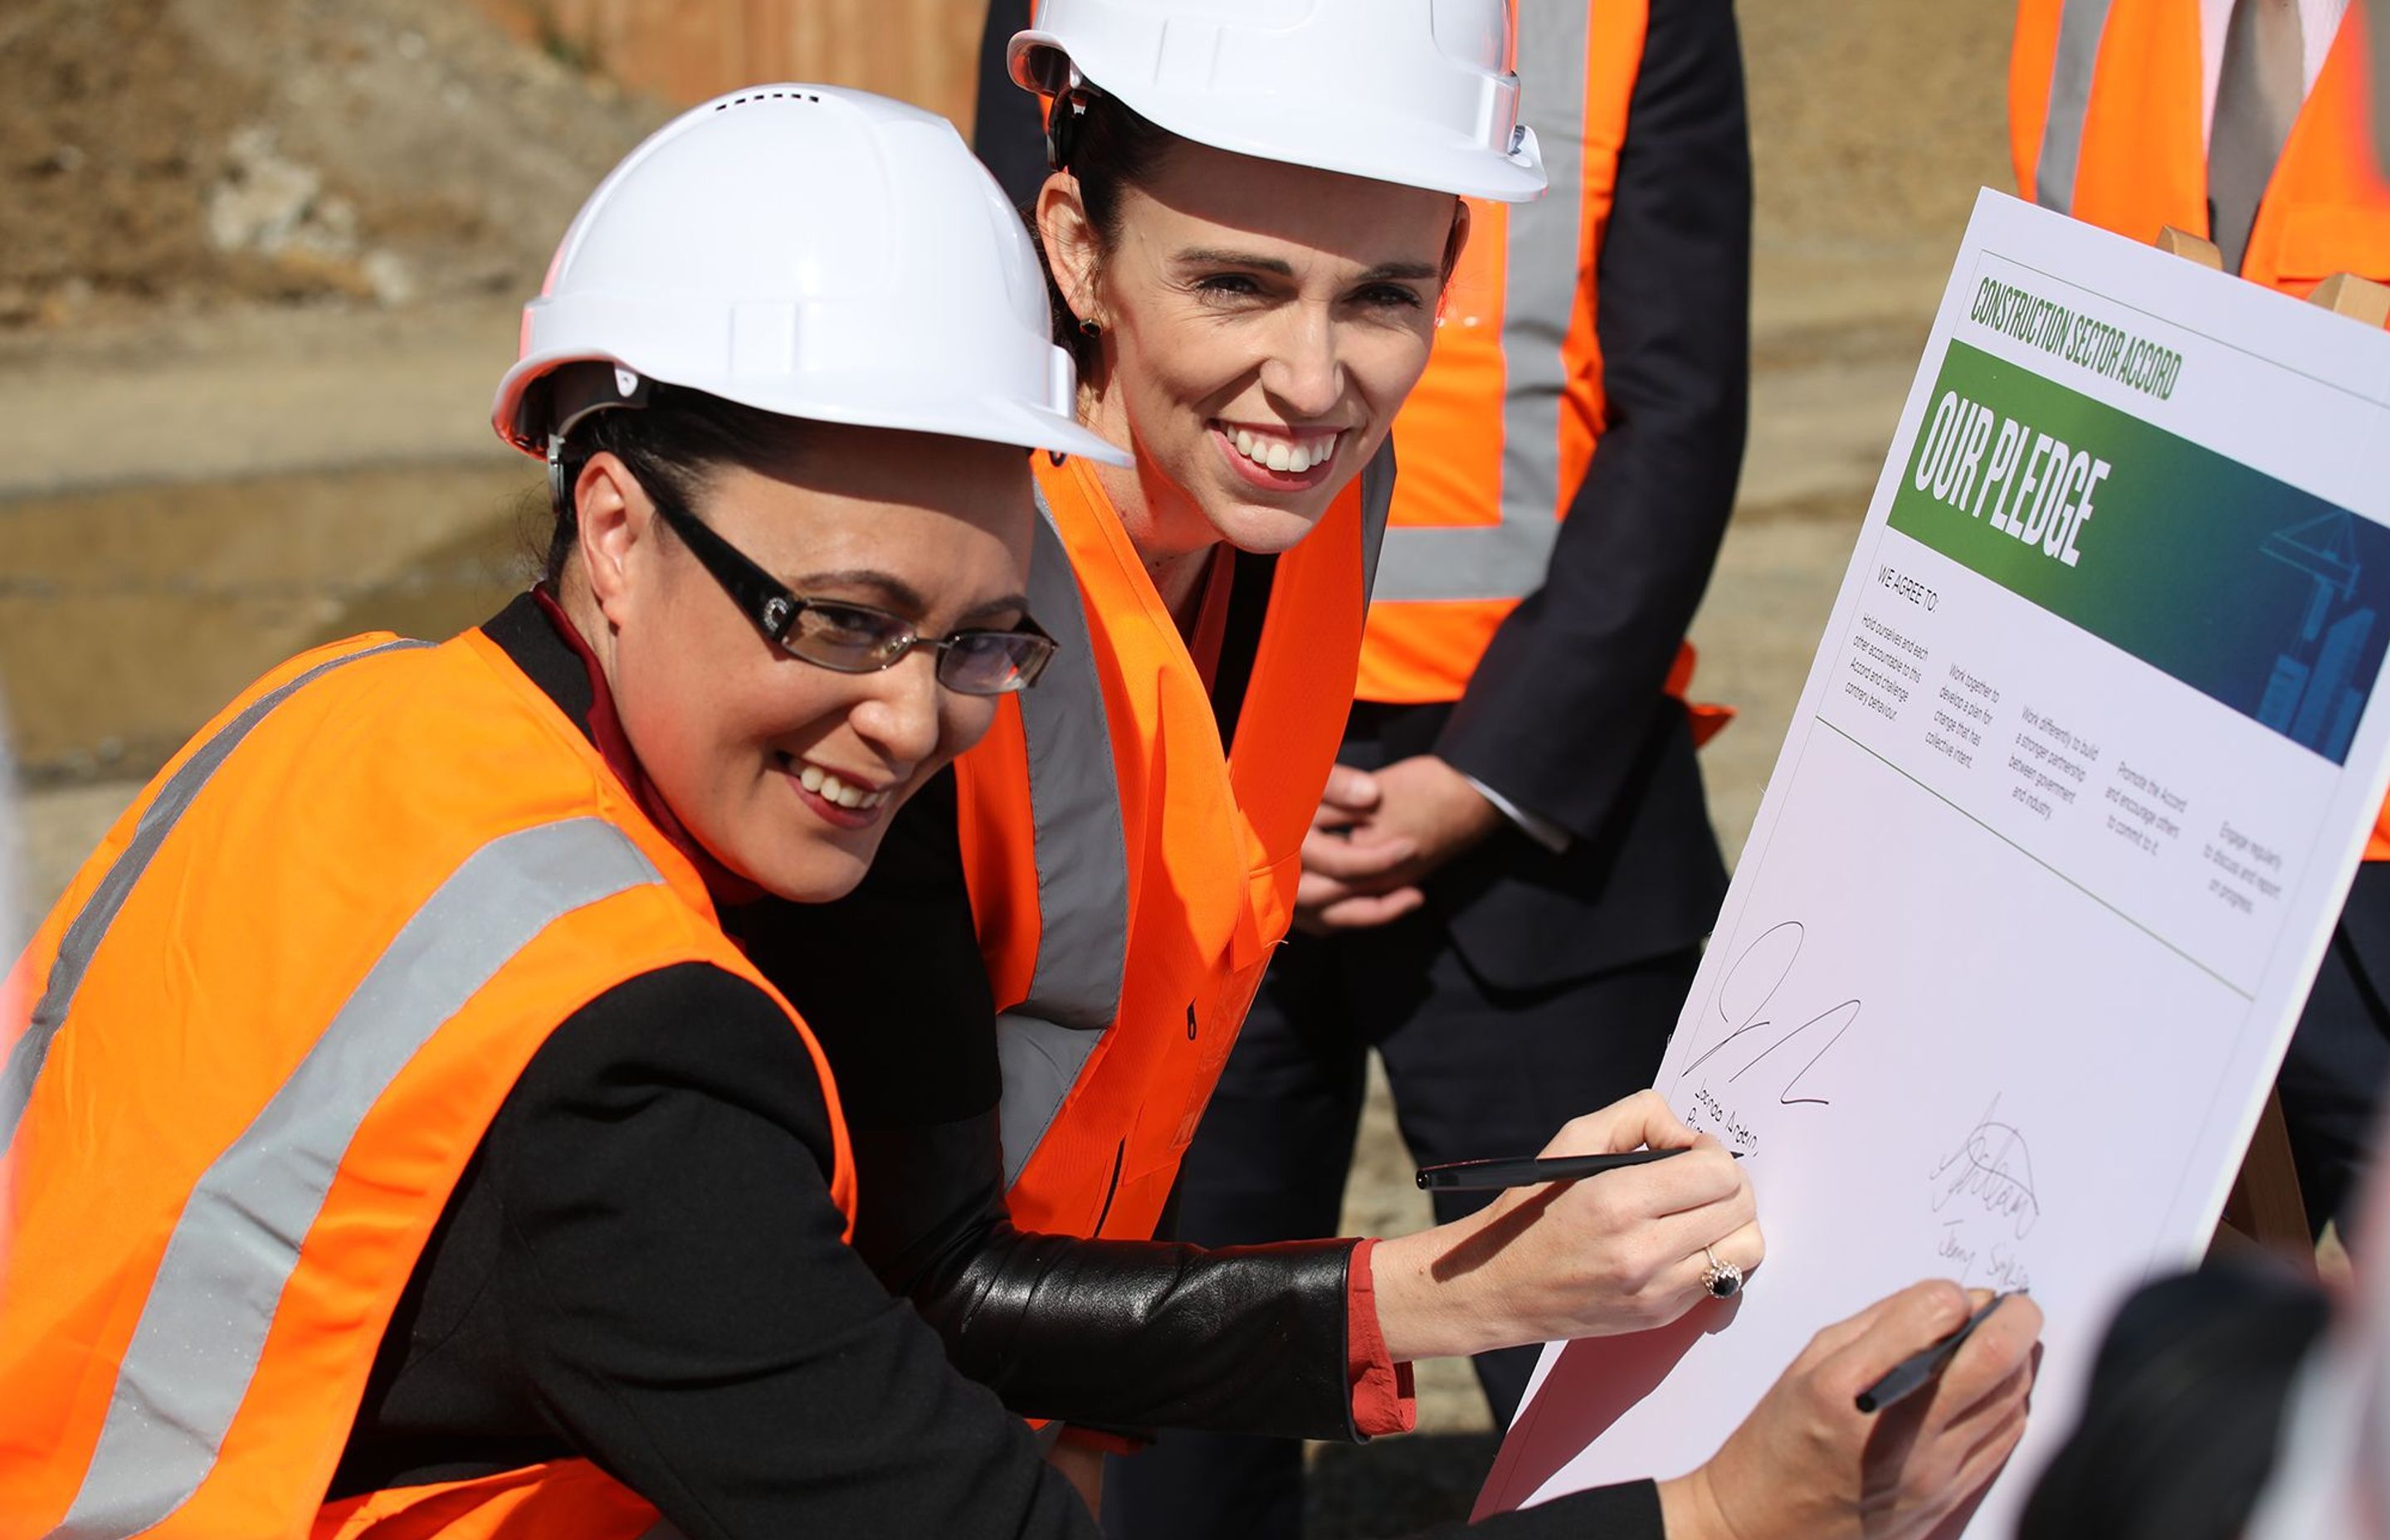 The Minister for Building and Construction, Hon. Jenny Salesa with the Prime Minister Jacinda Ardern.